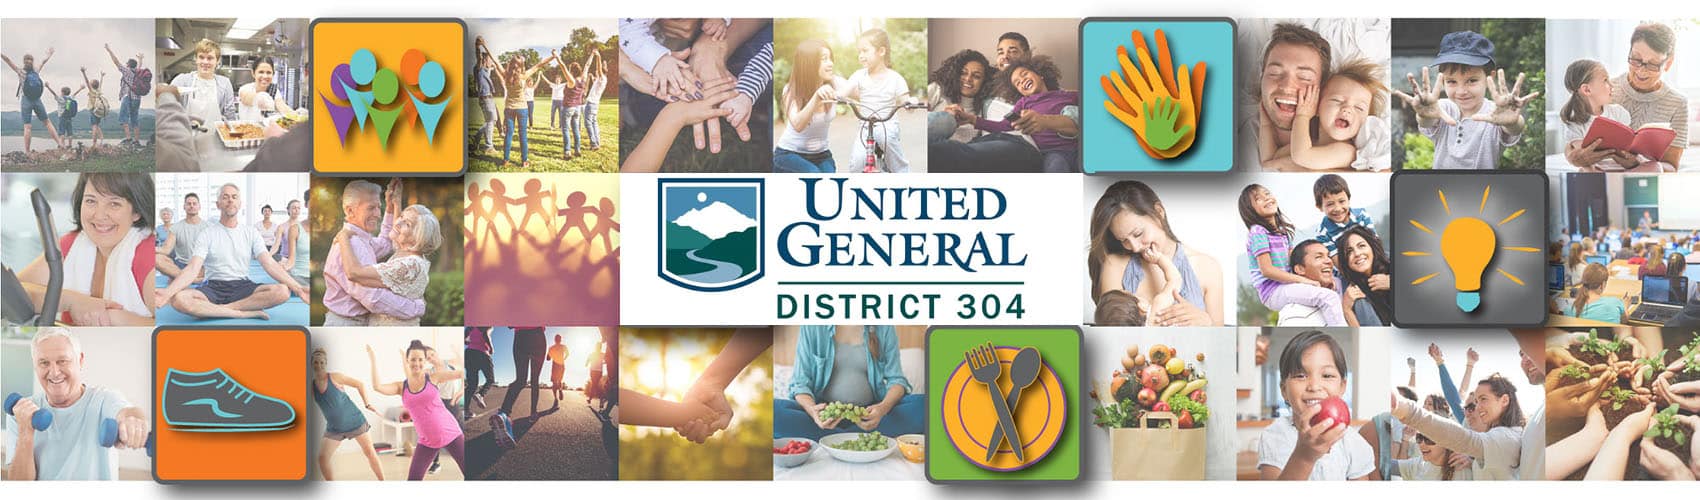 United General wellbeing collage